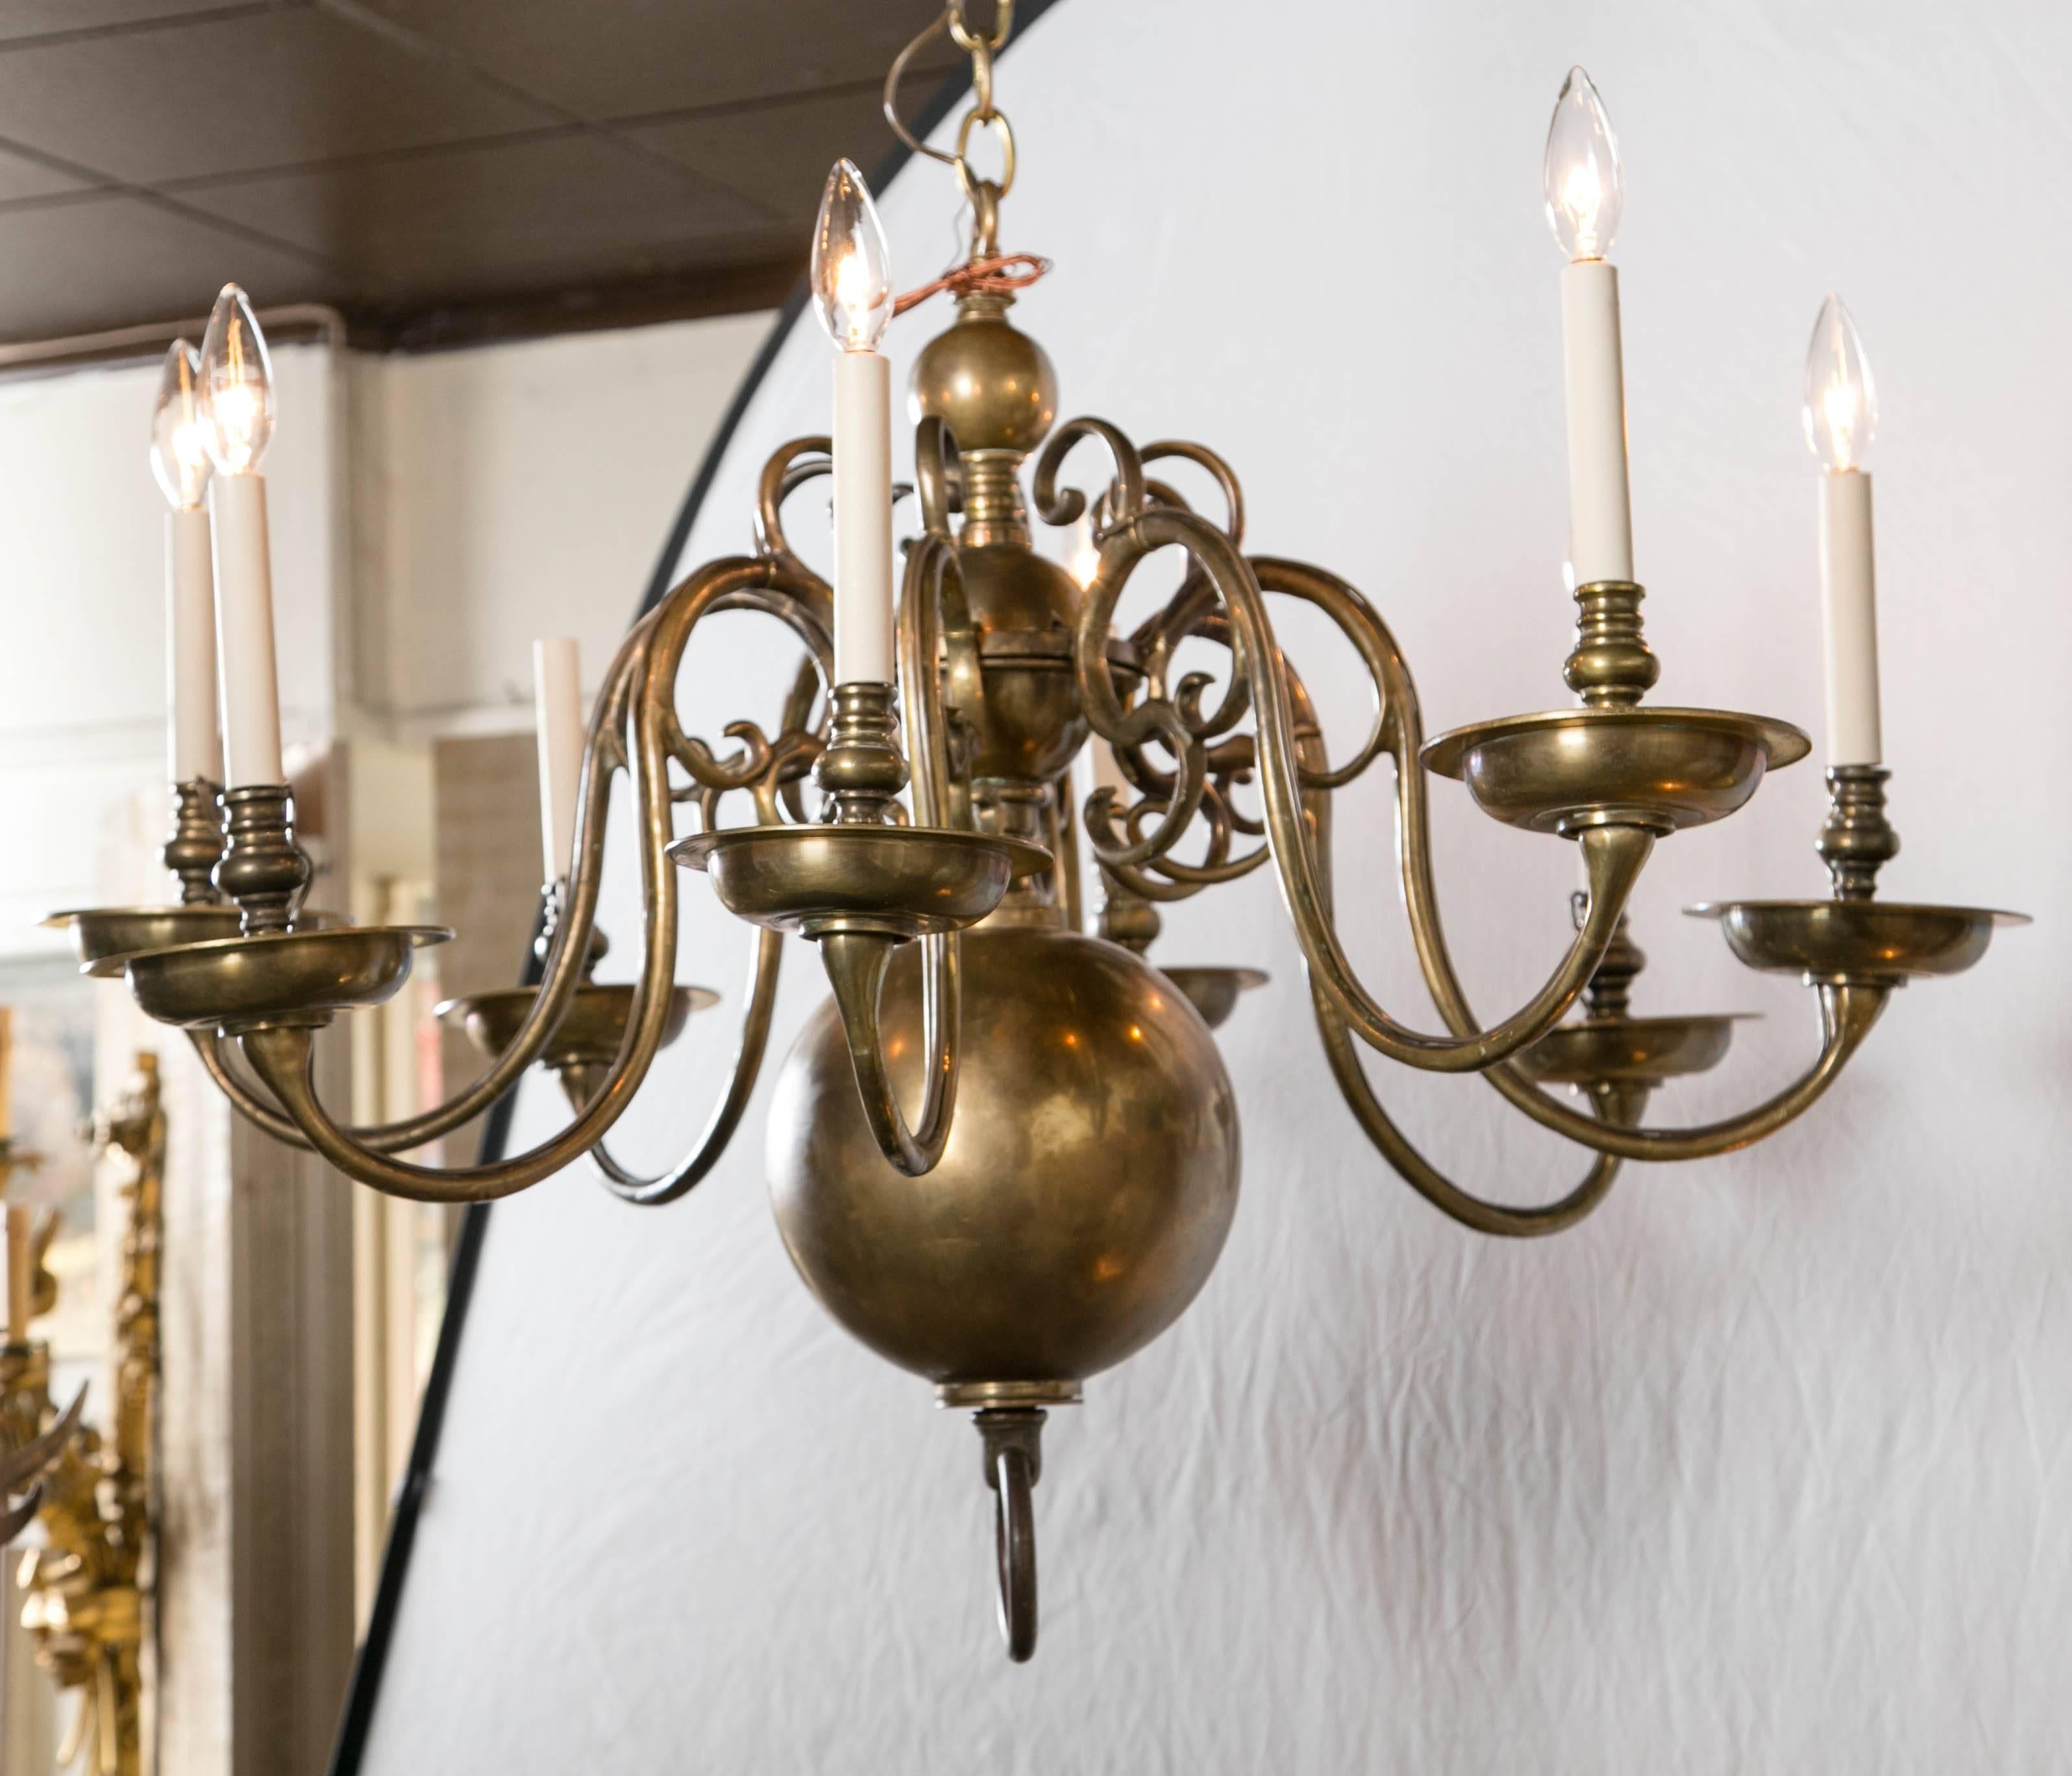 This single tier Dutch or English eight-light brass chandelier dates from the early part of the 19th century. It is electrified and in working order. Graduated brass balls form the central shaft with ring finials at top and bottom. Chandeliers as